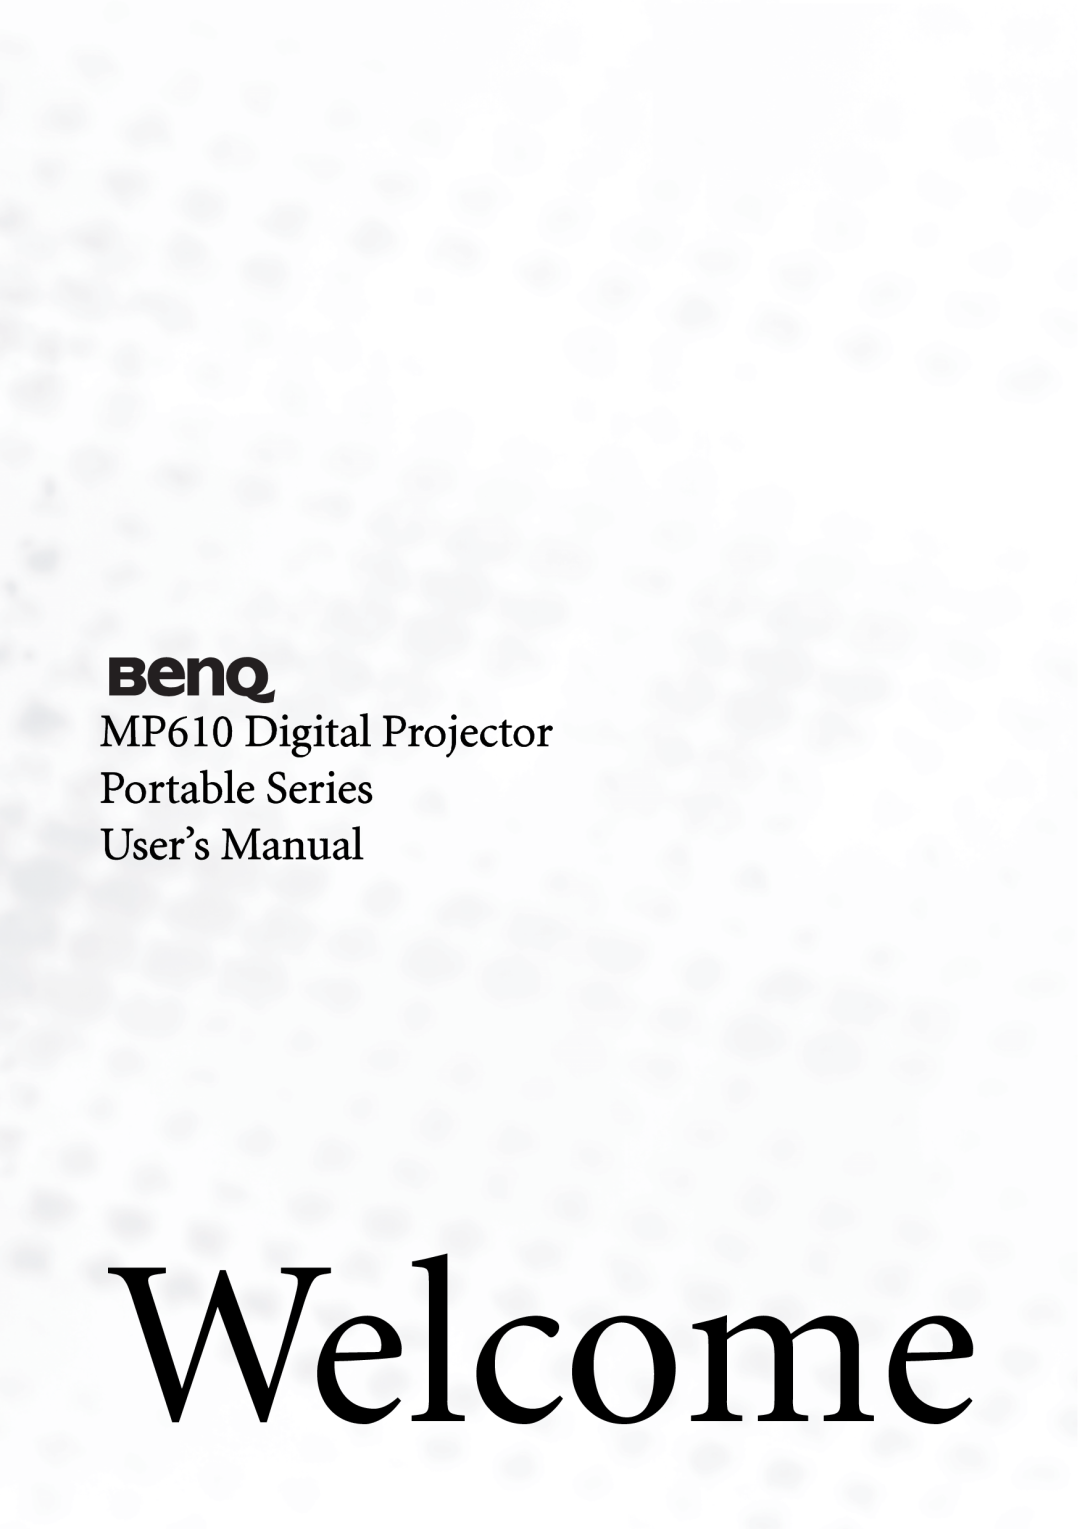 BenQ user manual Welcome, MP610 Digital Projector Portable Series User’s Manual 